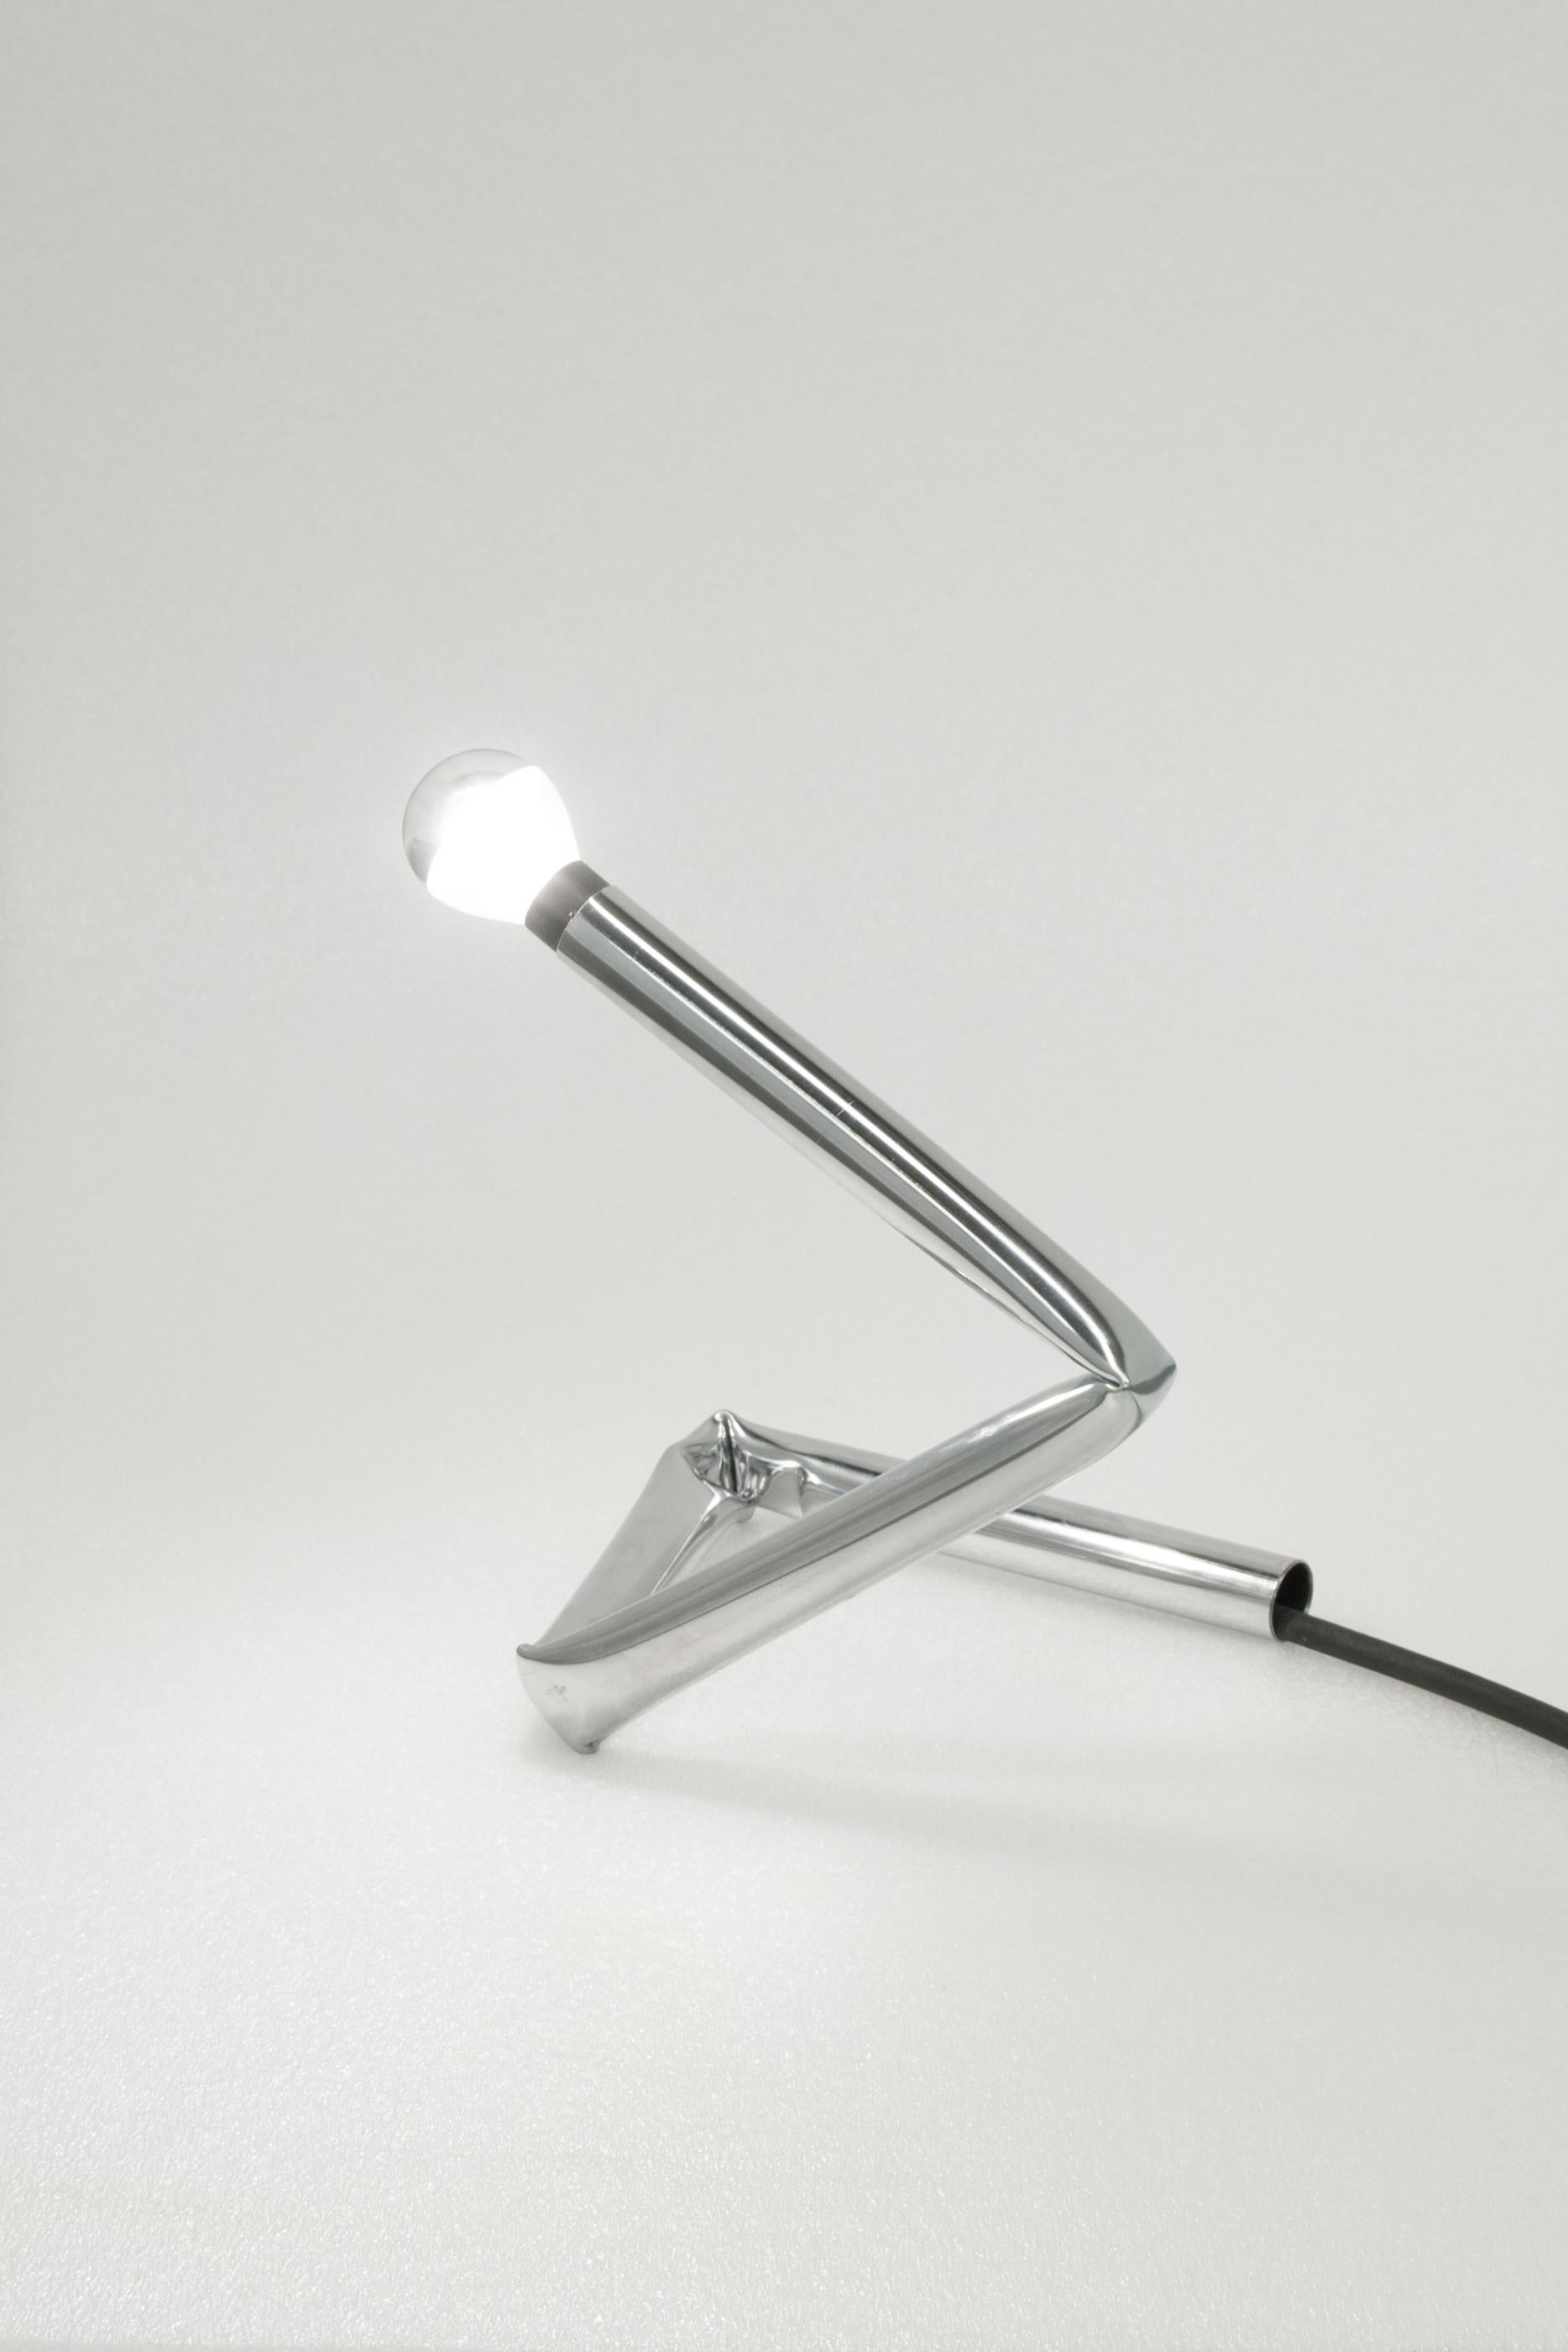 Other Tube Light 'Table/Wall Lamp' by Stephane Barbier Bouvet For Sale